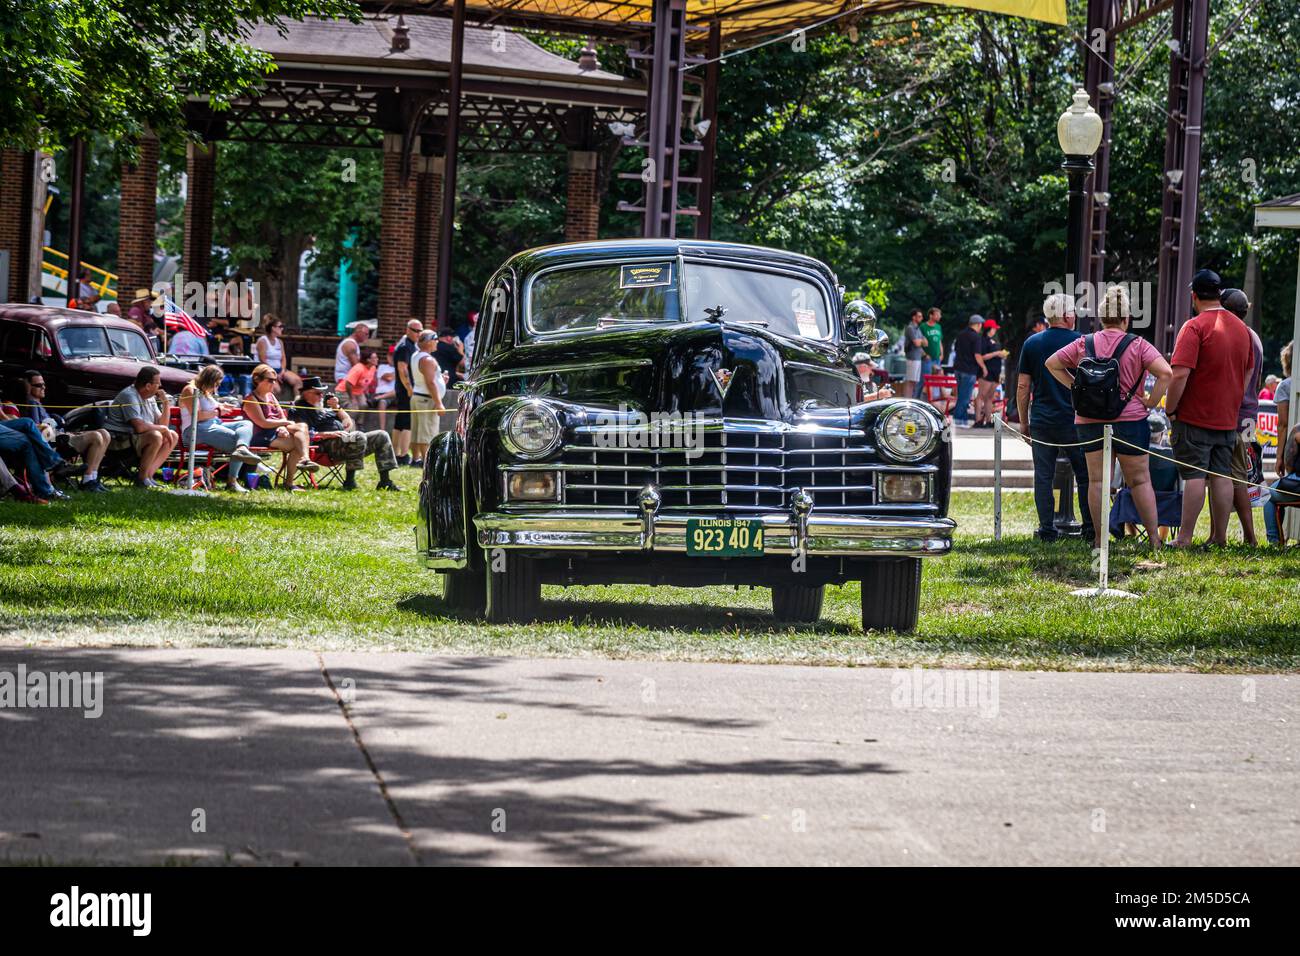 Des Moines, IA - July 03, 2022: Wide angle front view of a 1947 Cadillac Series 75 Fleetwood Limousine at a local car show. Stock Photo